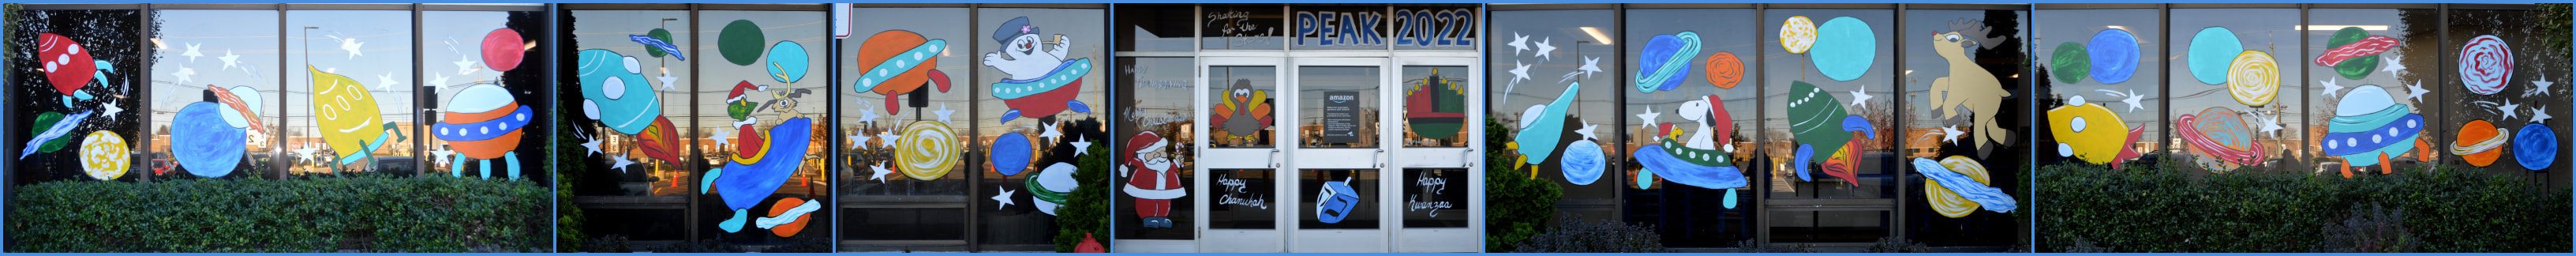 Peak and Holiday Window Paintings at the Amazon EWR5 Warehouse in Avenel, Middlesex County, NJ, featuring a Shooting for the Stars Theme, Thanksgiving, Christmas, Chanukah, and Kwanzaa